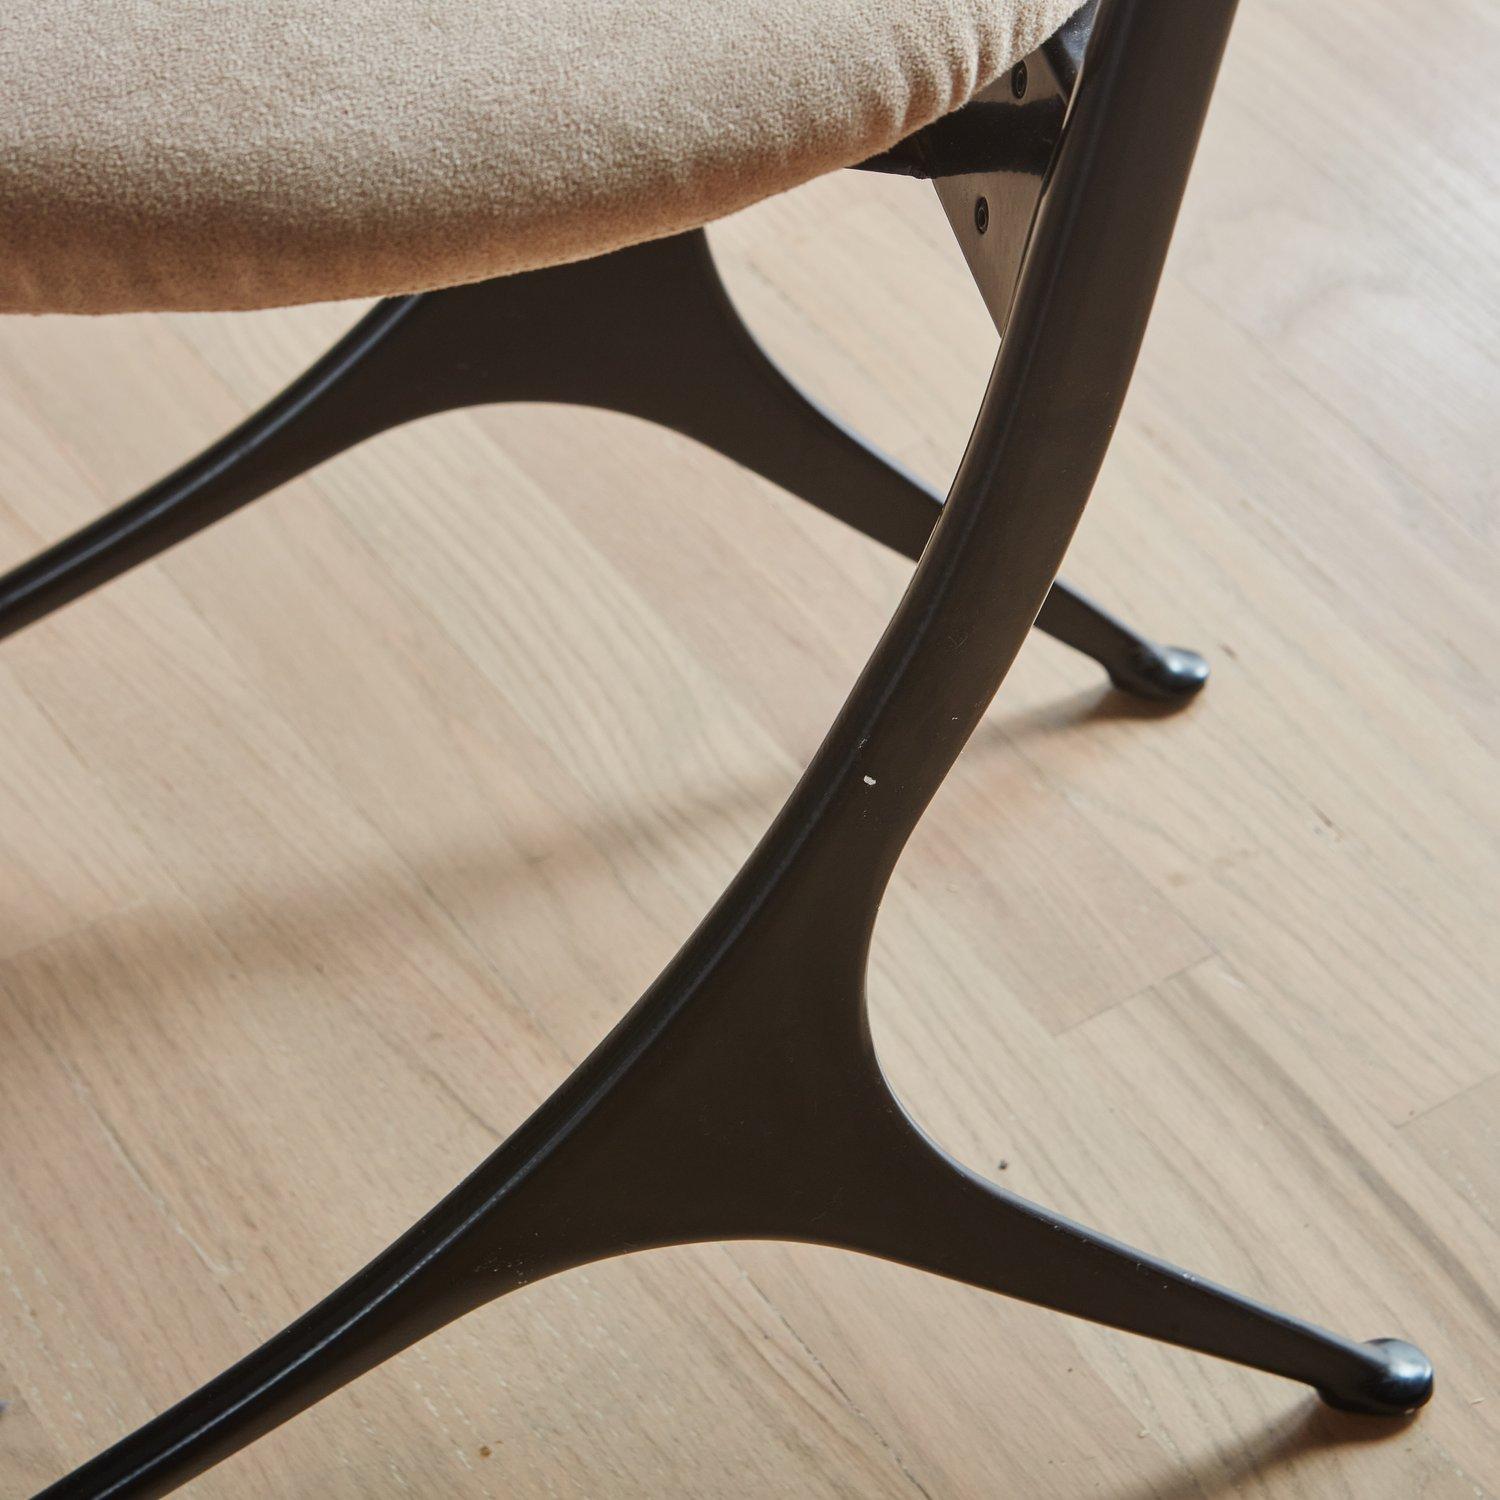 Pair of Postmodern Metal Dining Chairs in Taupe Suede by Zanotta, Italy 1980s 2